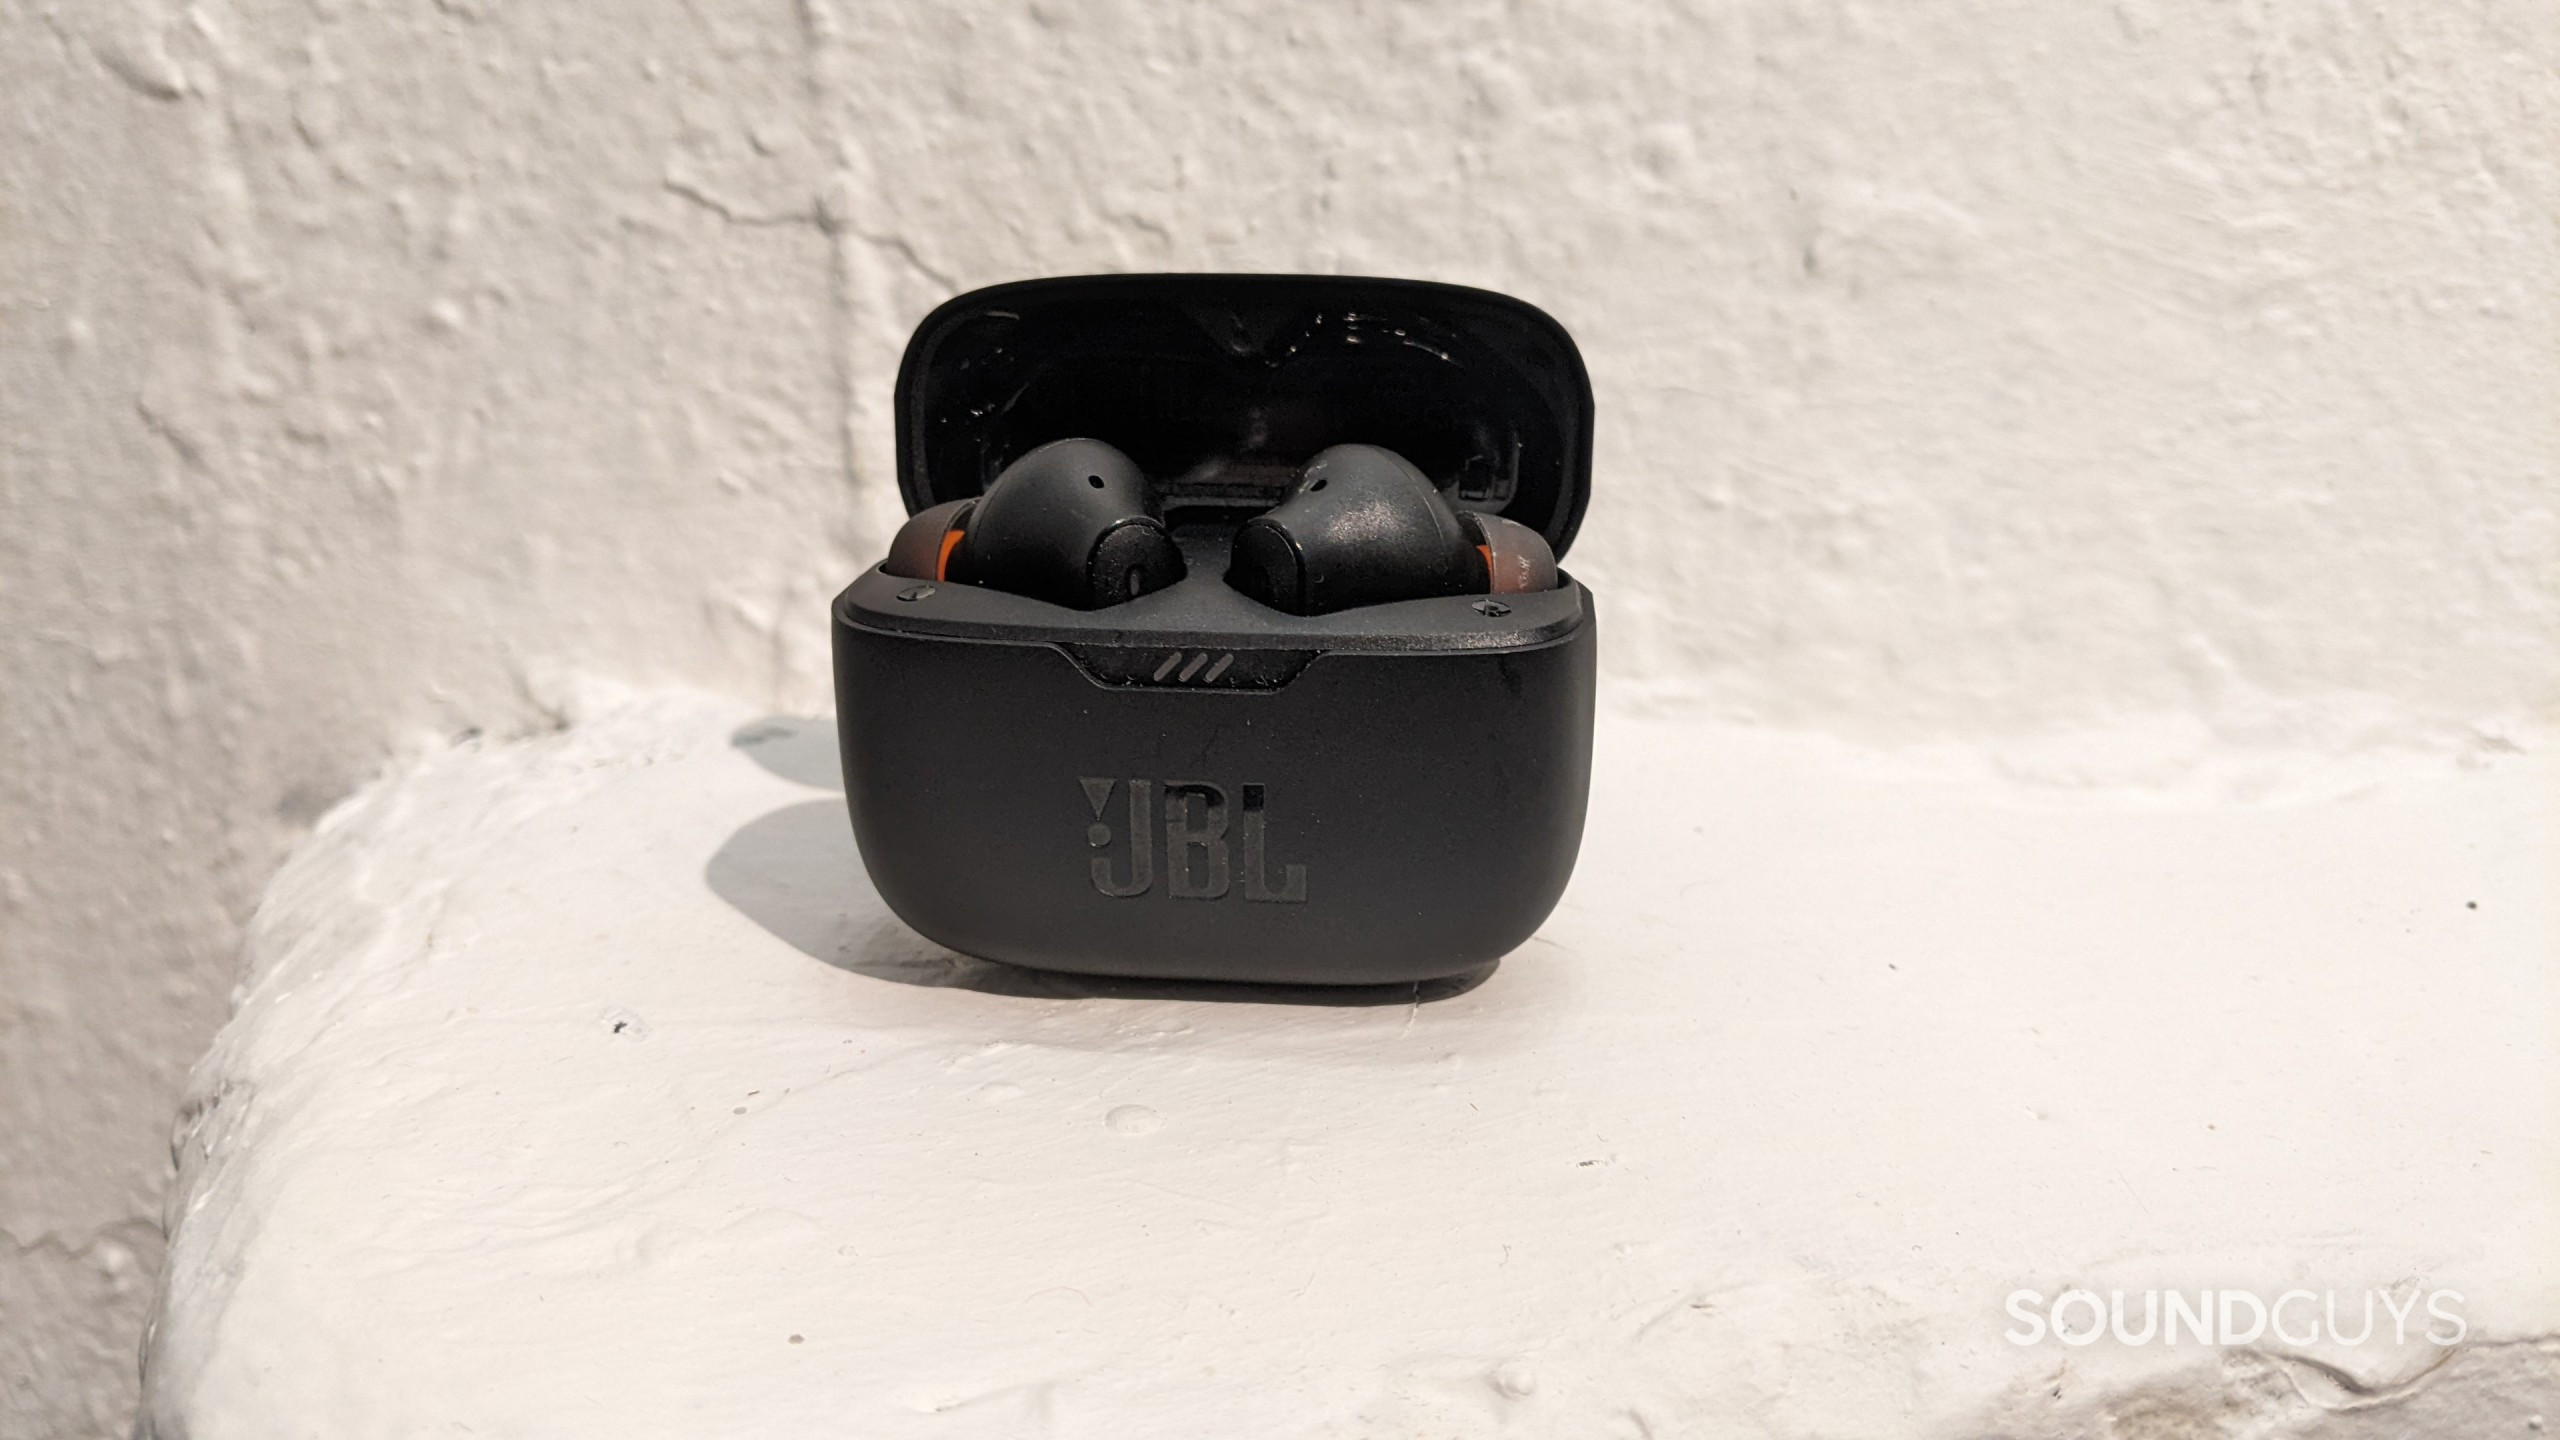 The JBL Tunes 230NC TWS earbuds in the charging case which is upright because it is carefully resting on a curved white surface.